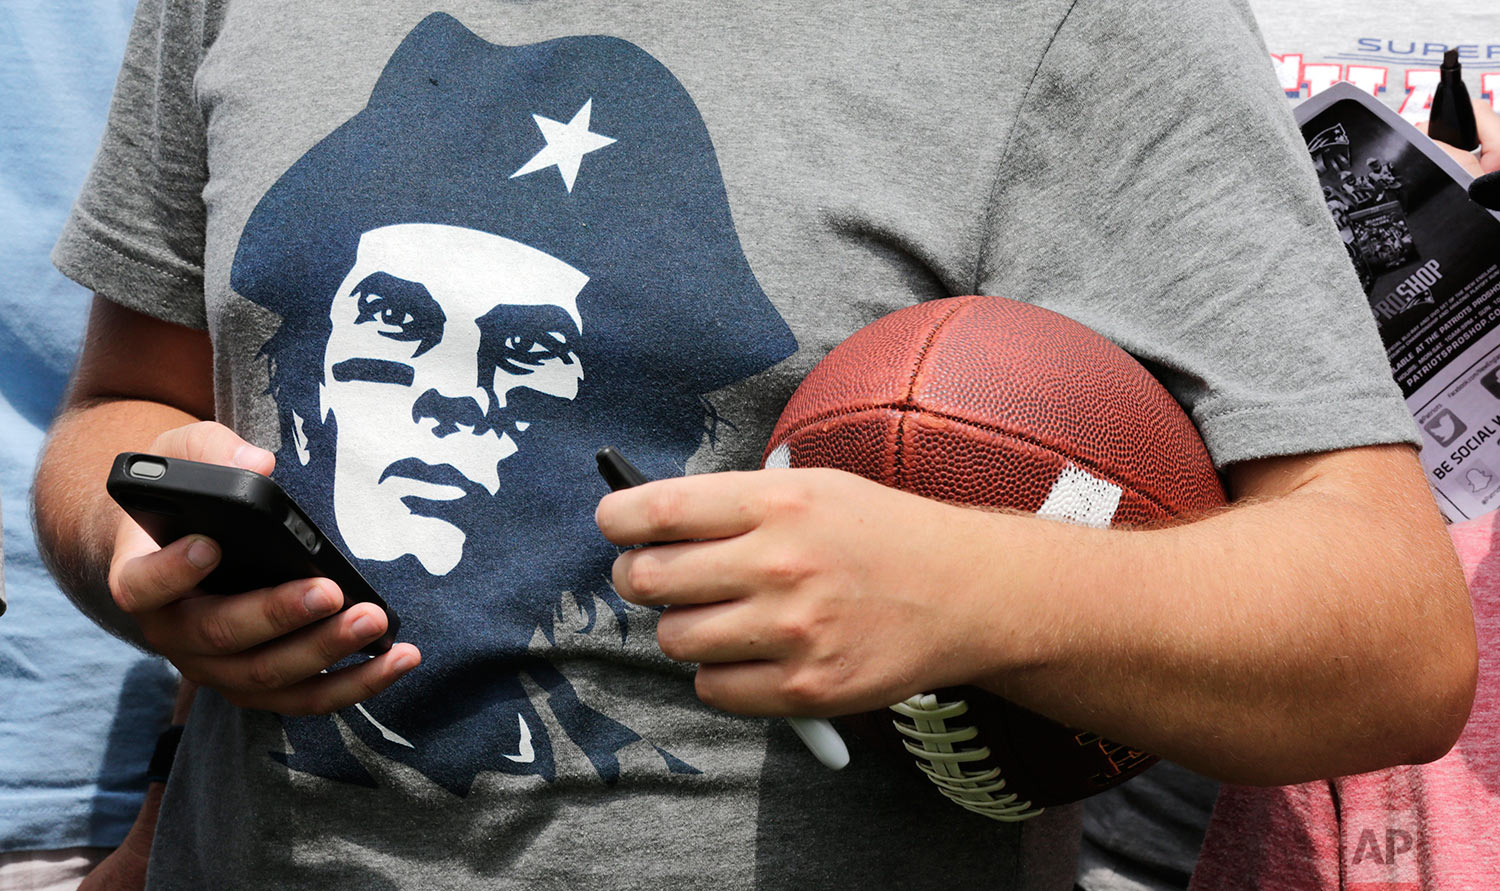  A New England Patriots fan, wearing a Che Guevara-like t-shirt depicting quarterback Tom Brady, waits for a chance to get an autograph during an NFL football training camp in Foxborough, Mass., Thursday, July 30, 2015. (AP Photo/Charles Krupa) 